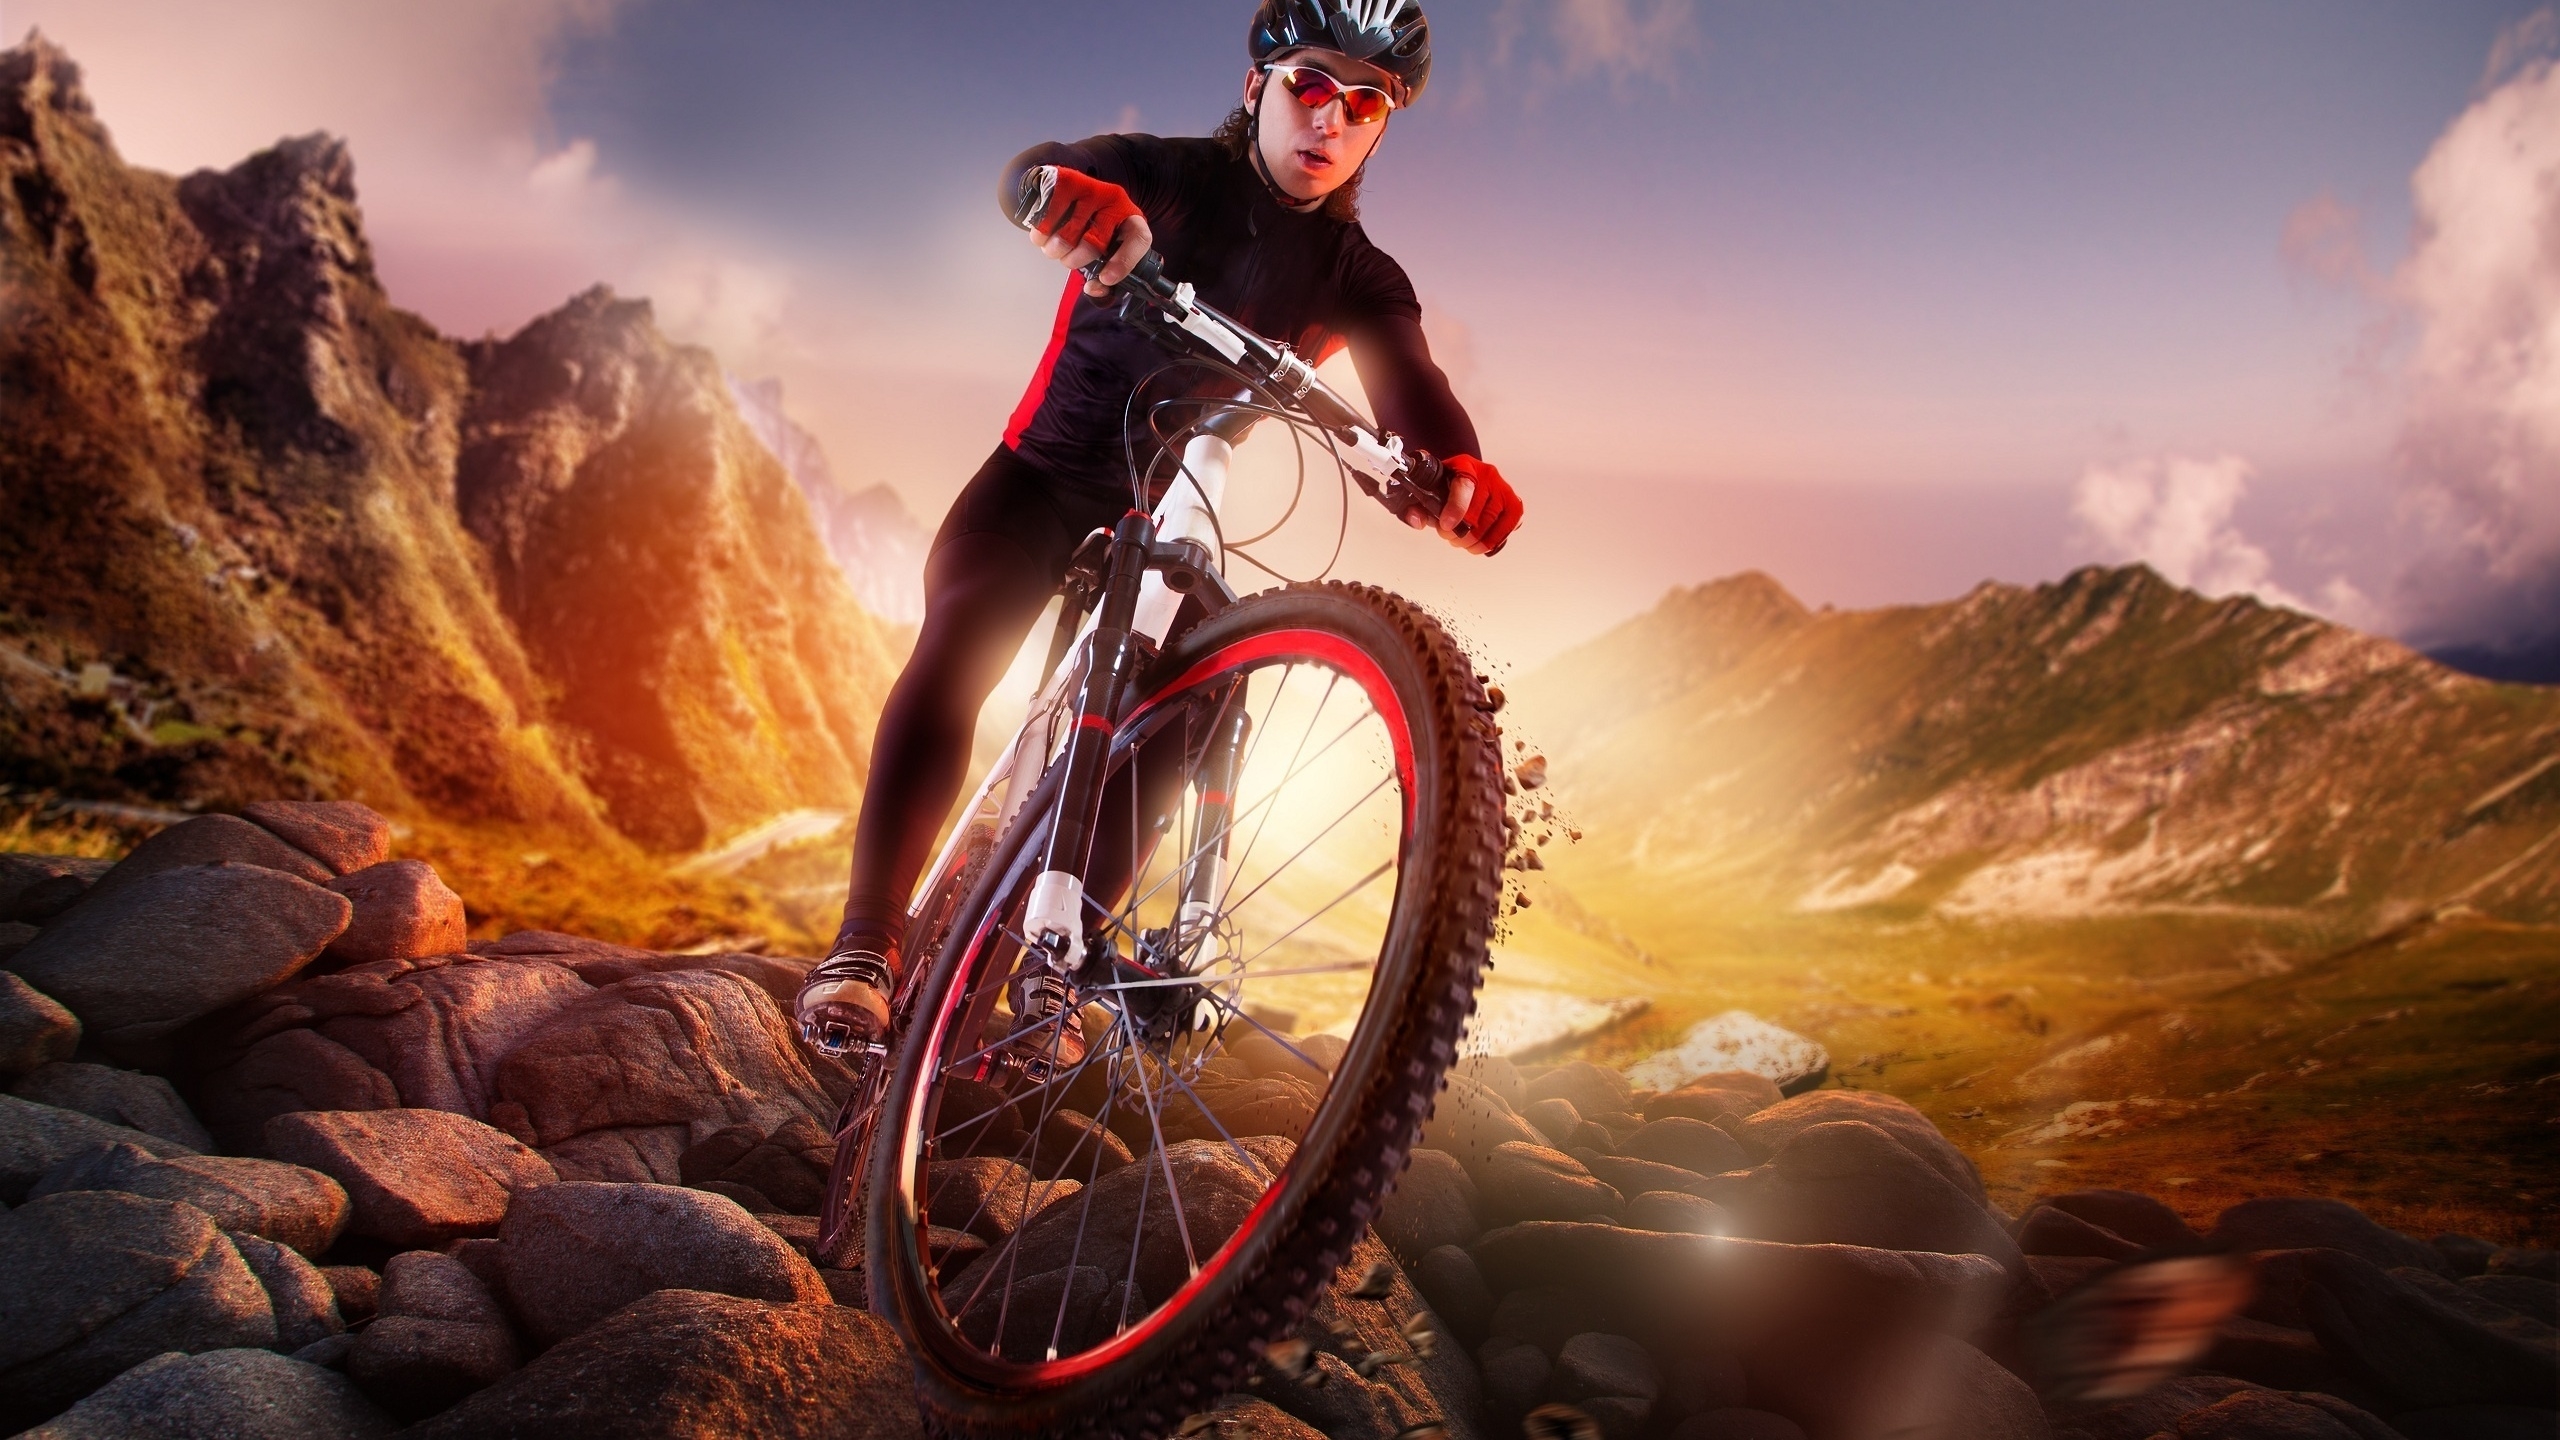 Abstract Mountain Biker for 2560x1440 HDTV resolution